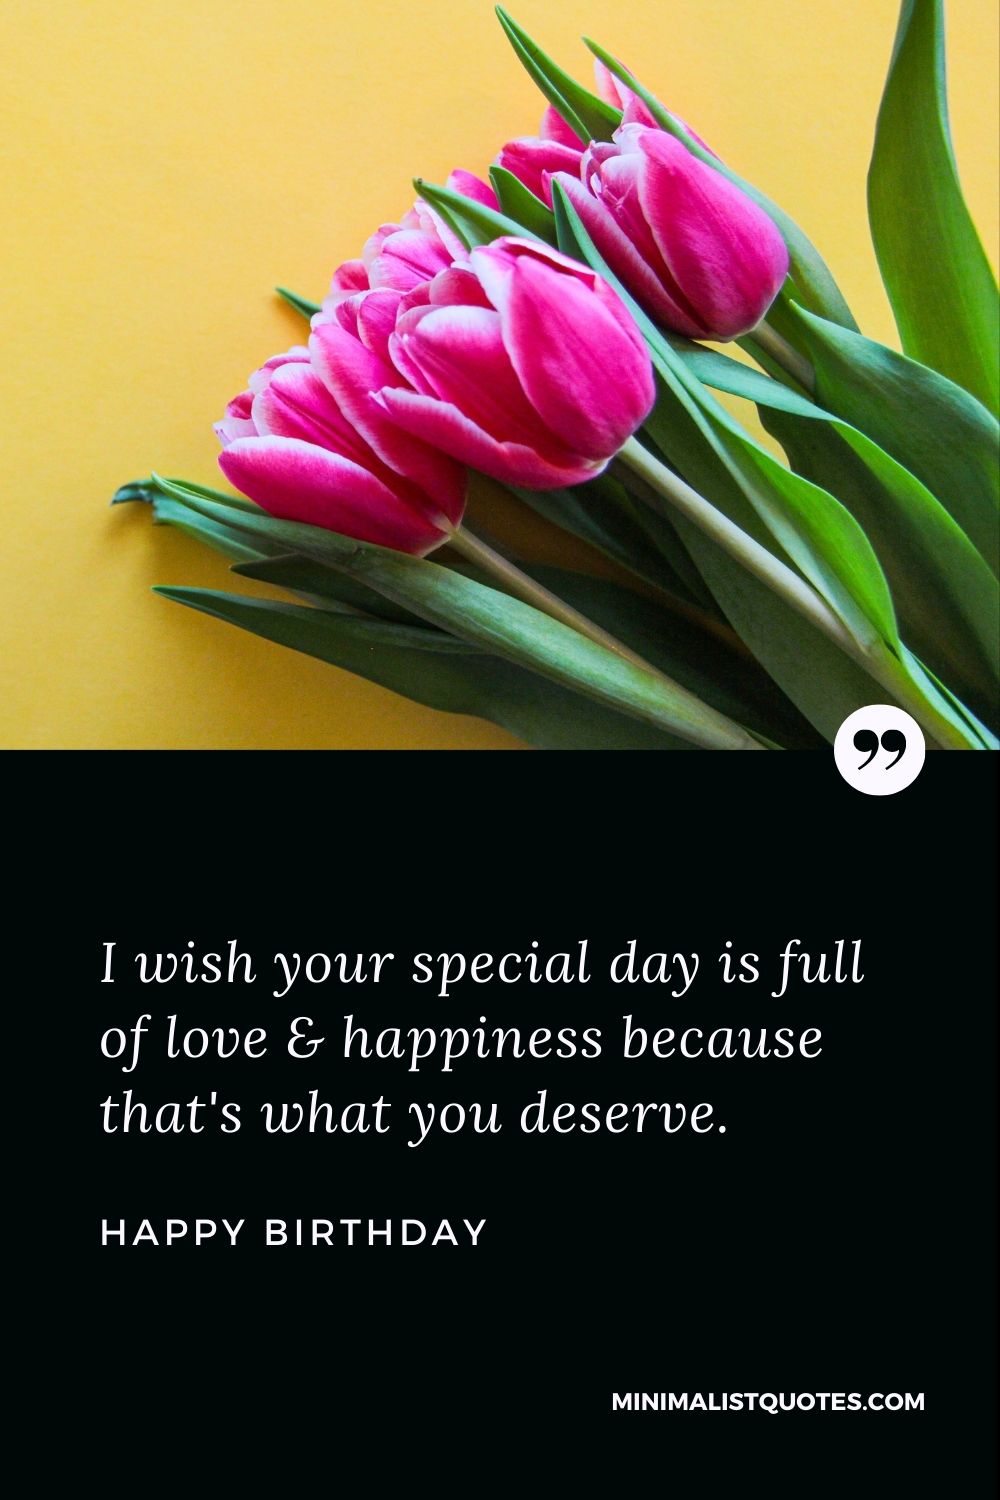 Happy Birthday Wishes - I wish your special day is full of love & happiness because that's what you deserve.